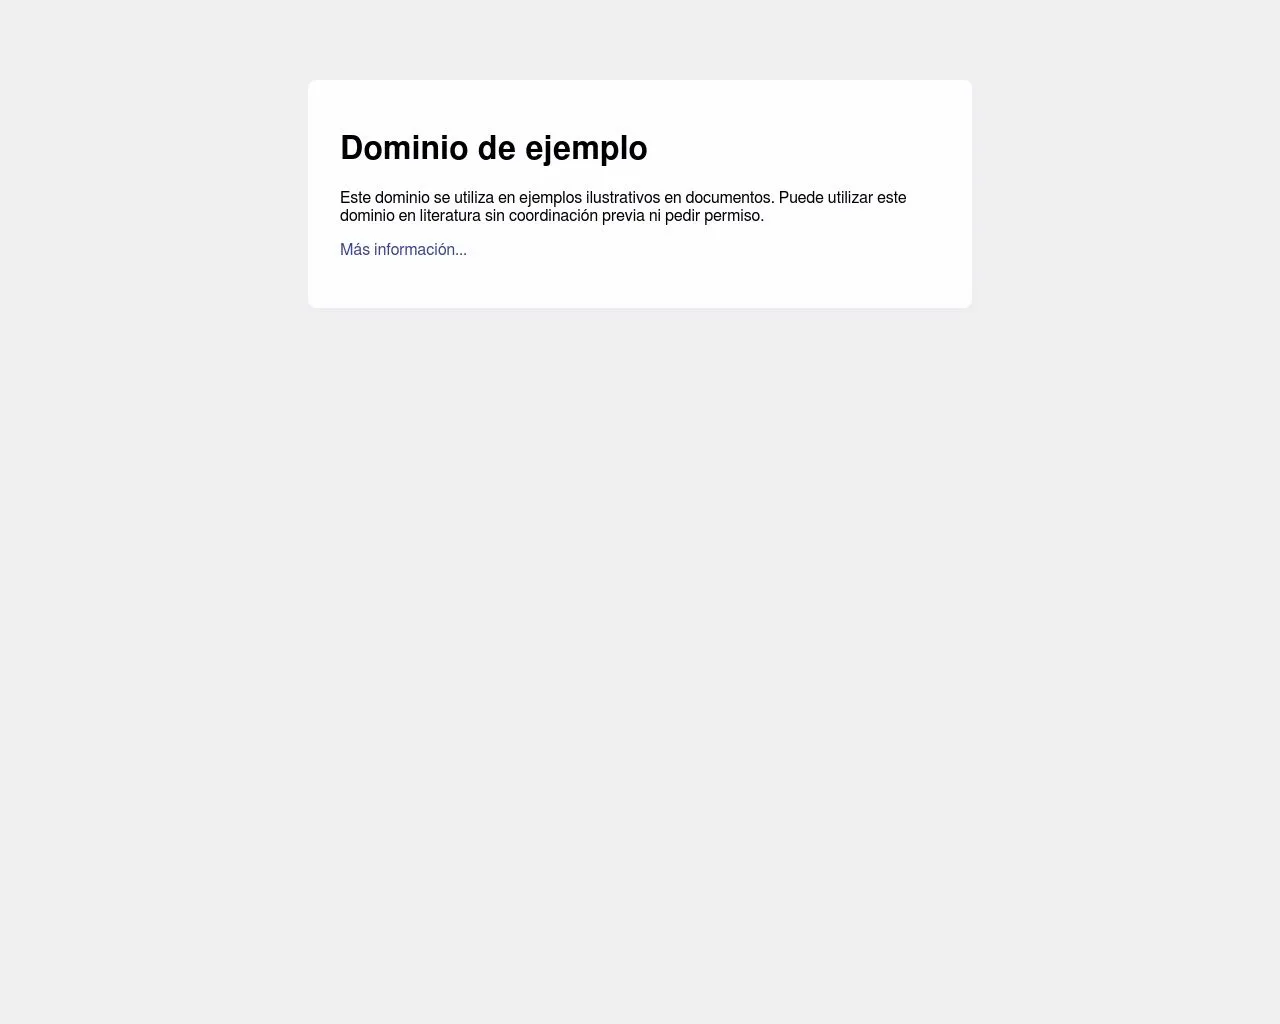 The example.com website rendered in the Spanish language